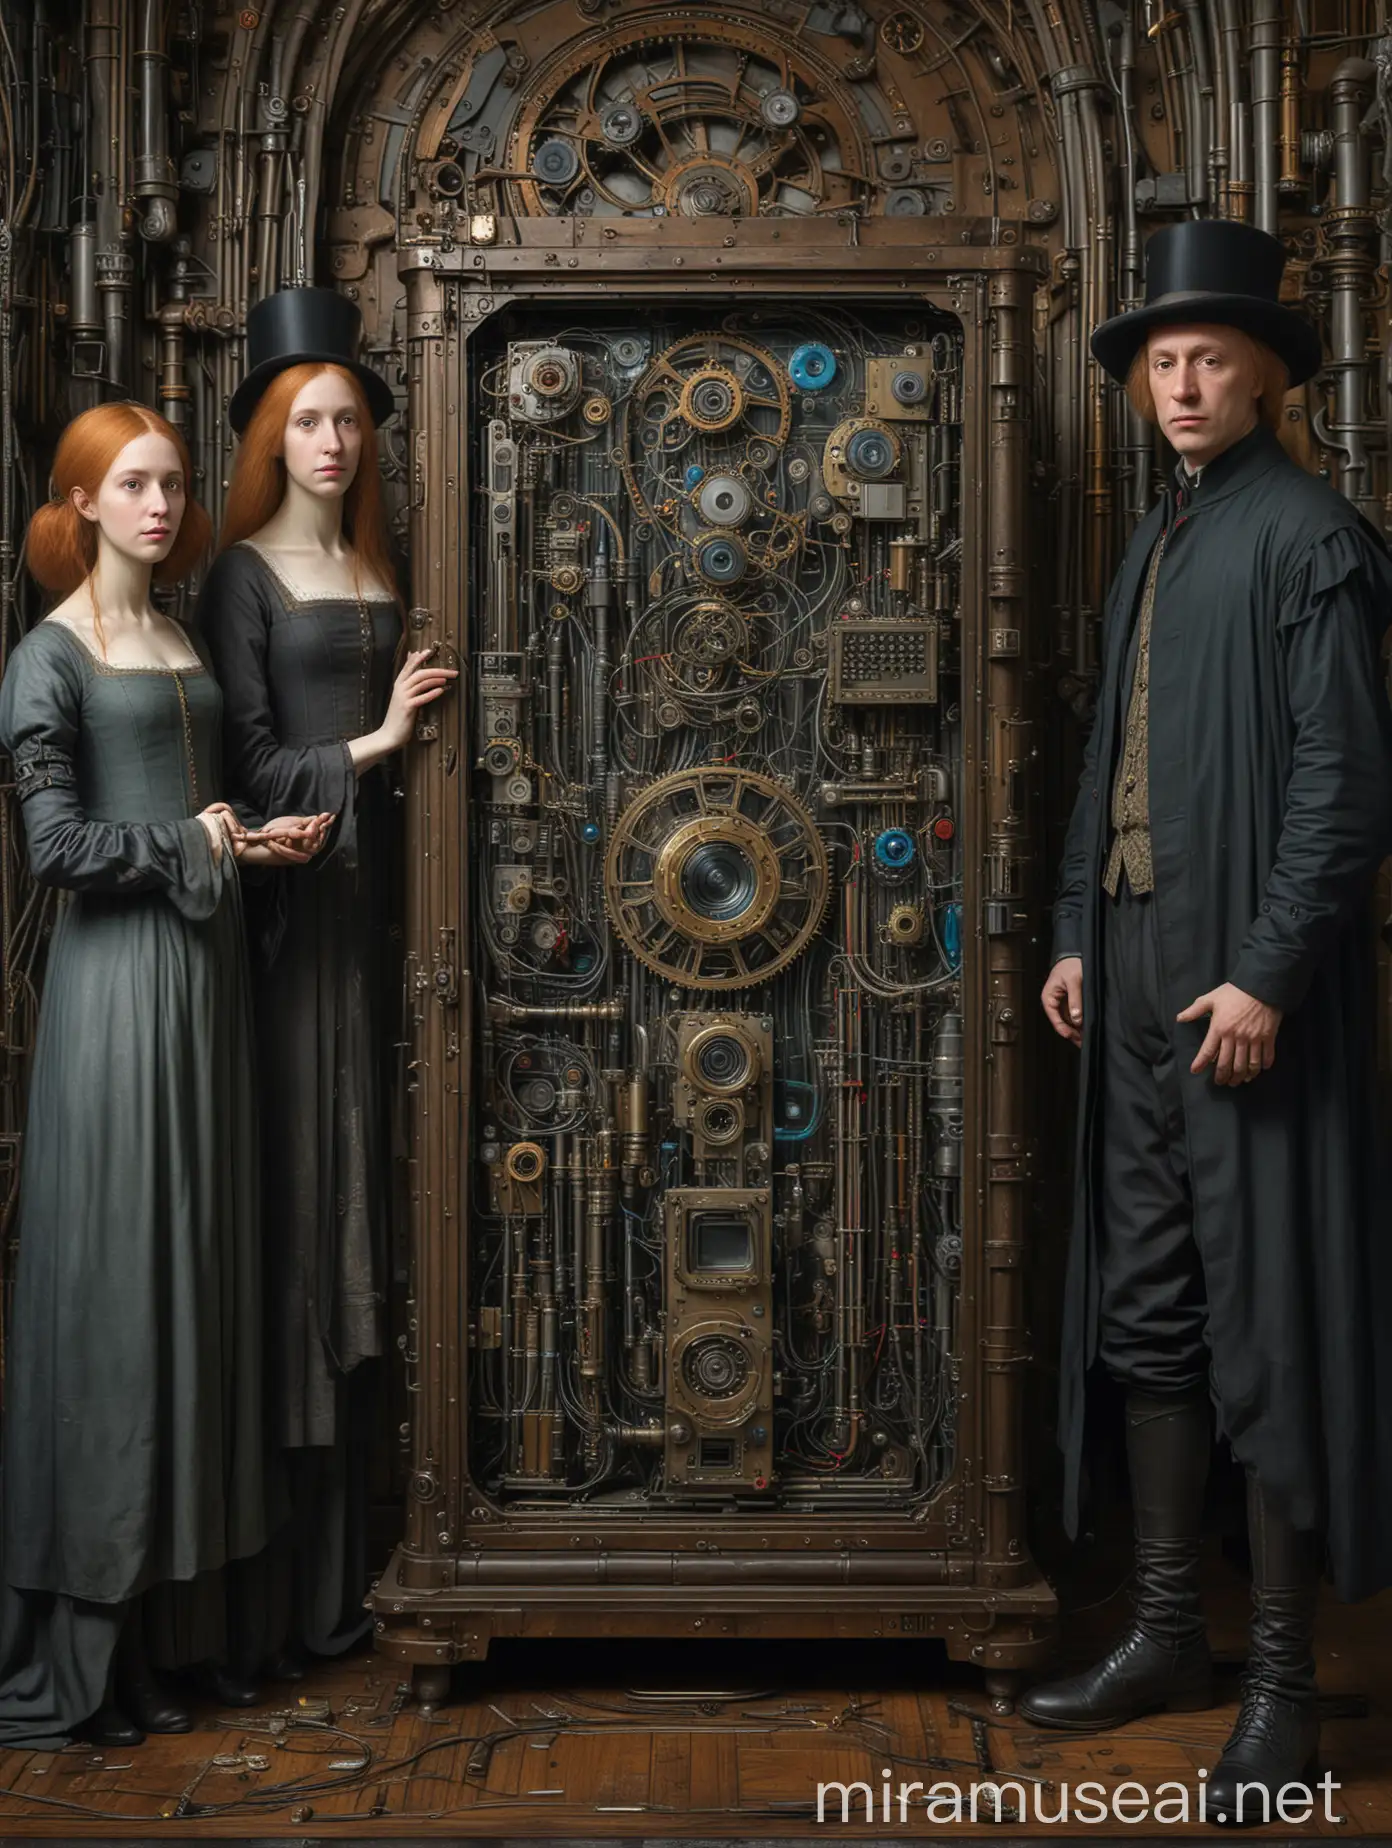 Highly detailed painting closely based on ((Arnolfini Portrait by Jan van Eyck)), behind the standing figures is a huge ((steampunk mainframe computer)), use muted colors only, high quality